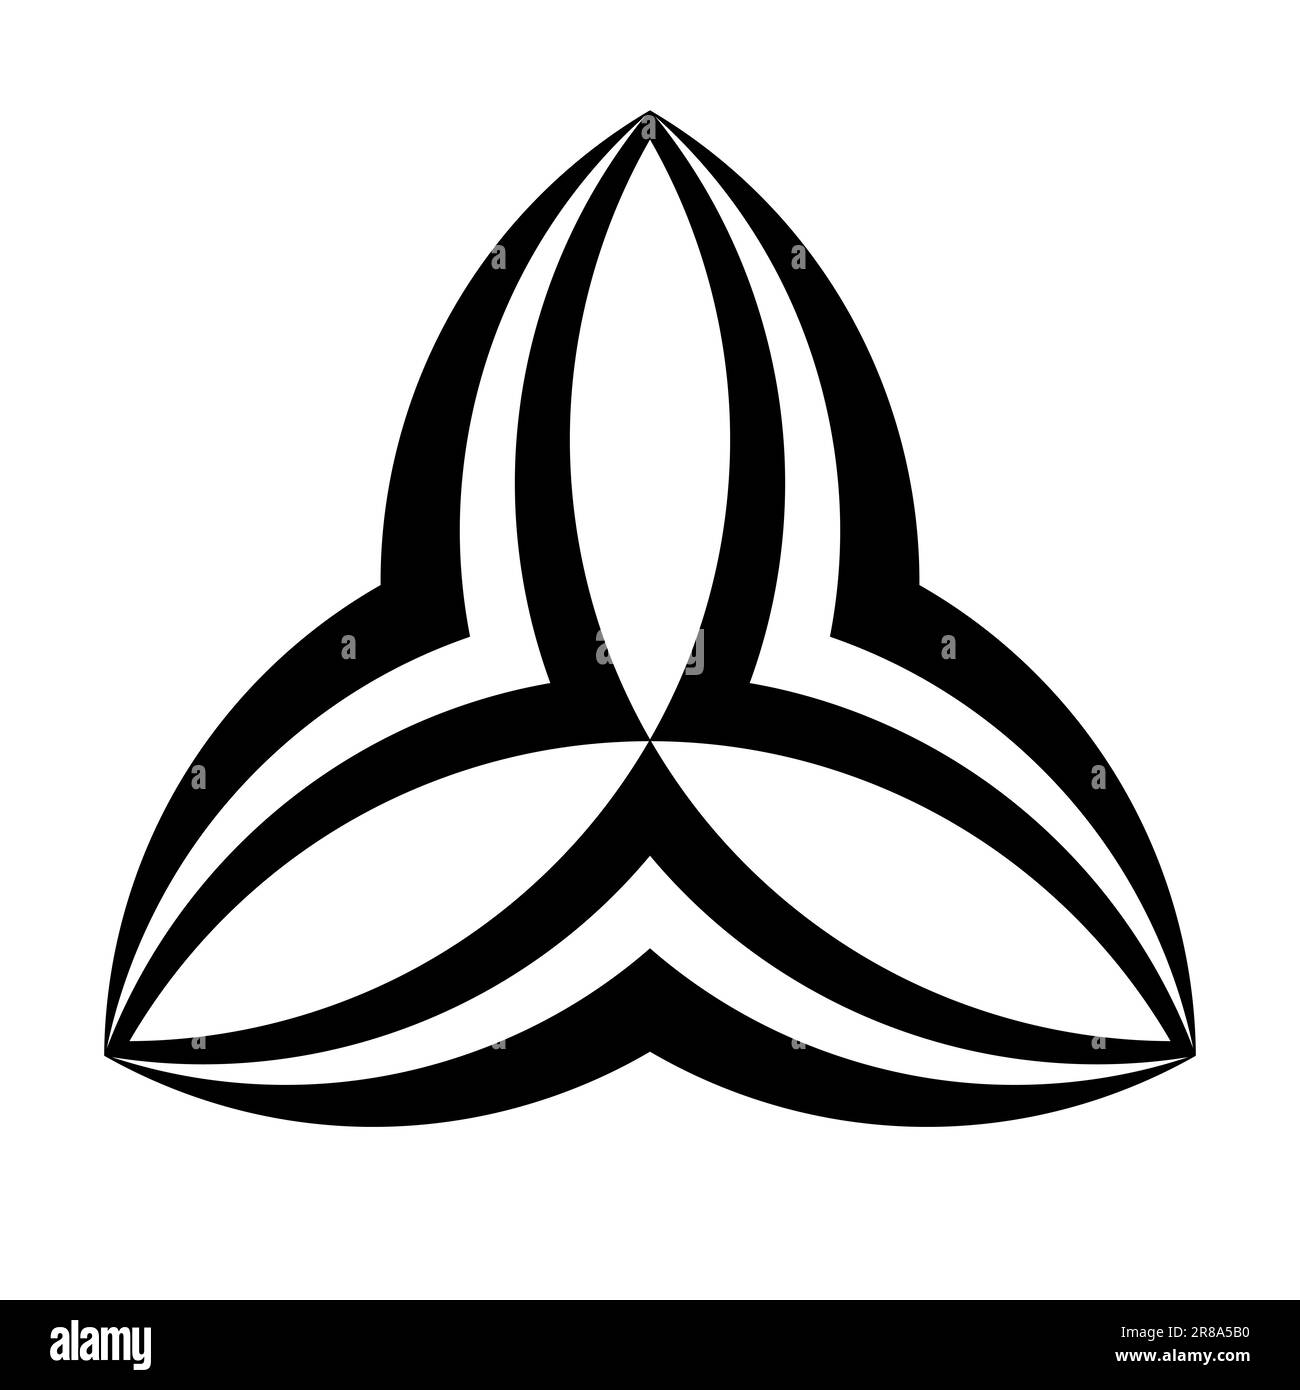 Triquetra shaped symbol. Three lenses or also Vesica piscis shapes, arranged in an equilateral triangle, enclosed by three wing-like arches. Stock Photo